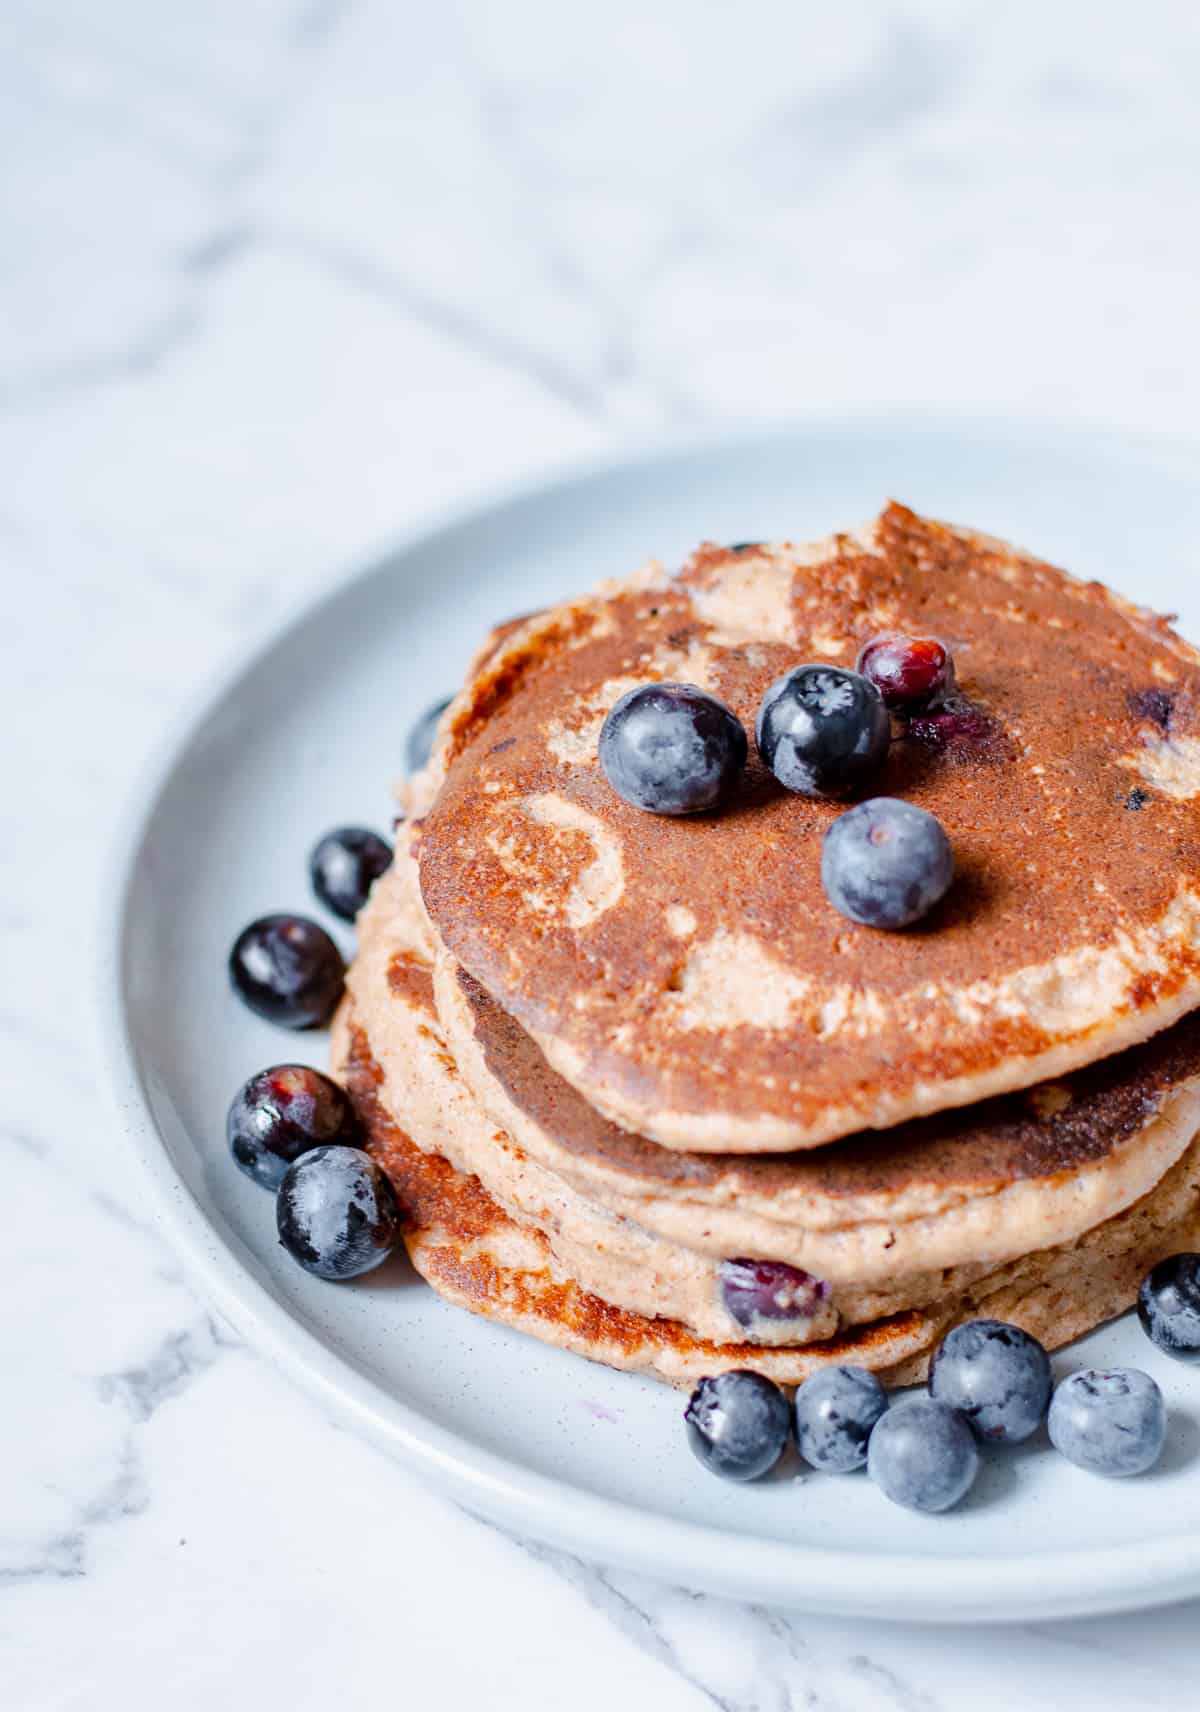 Pancakes with Blueberries on Blue Plate